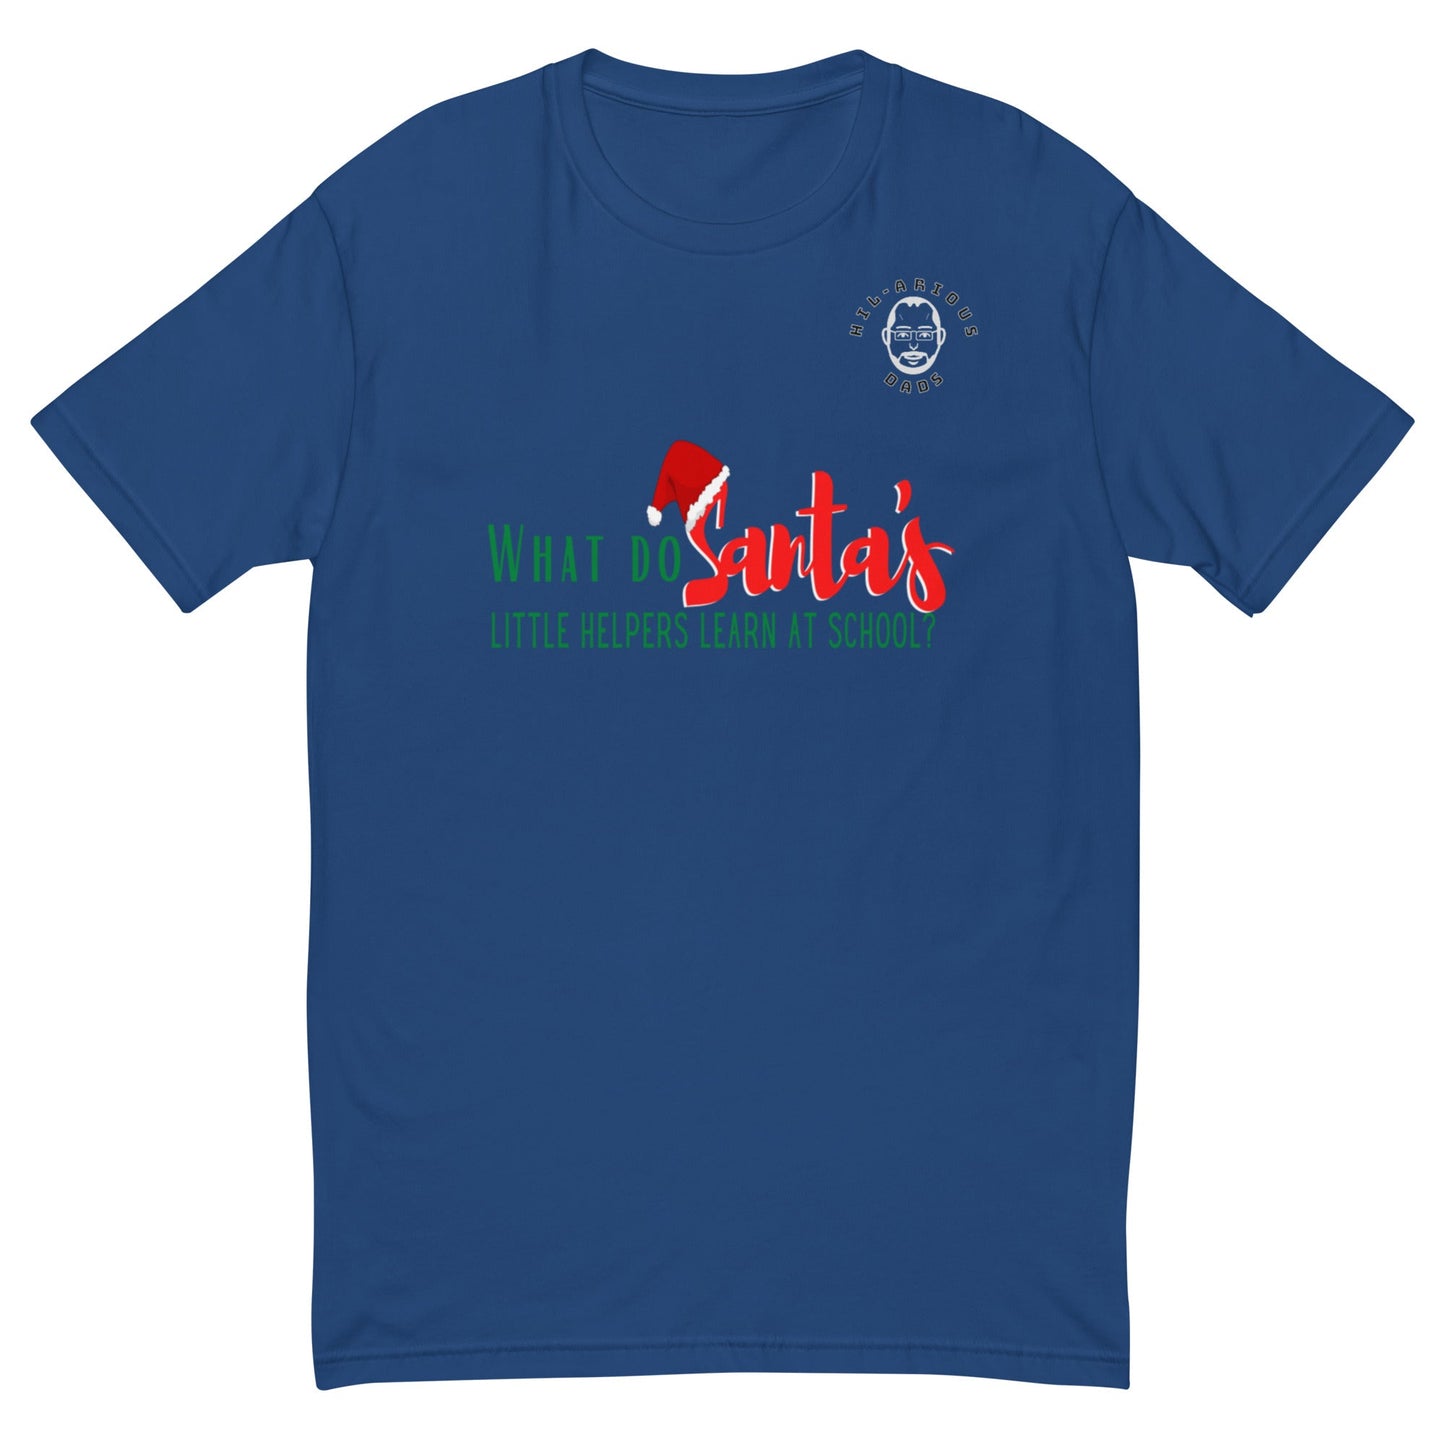 What do Santa’s little helpers learn at school?-T-shirt - Hil-arious Dads